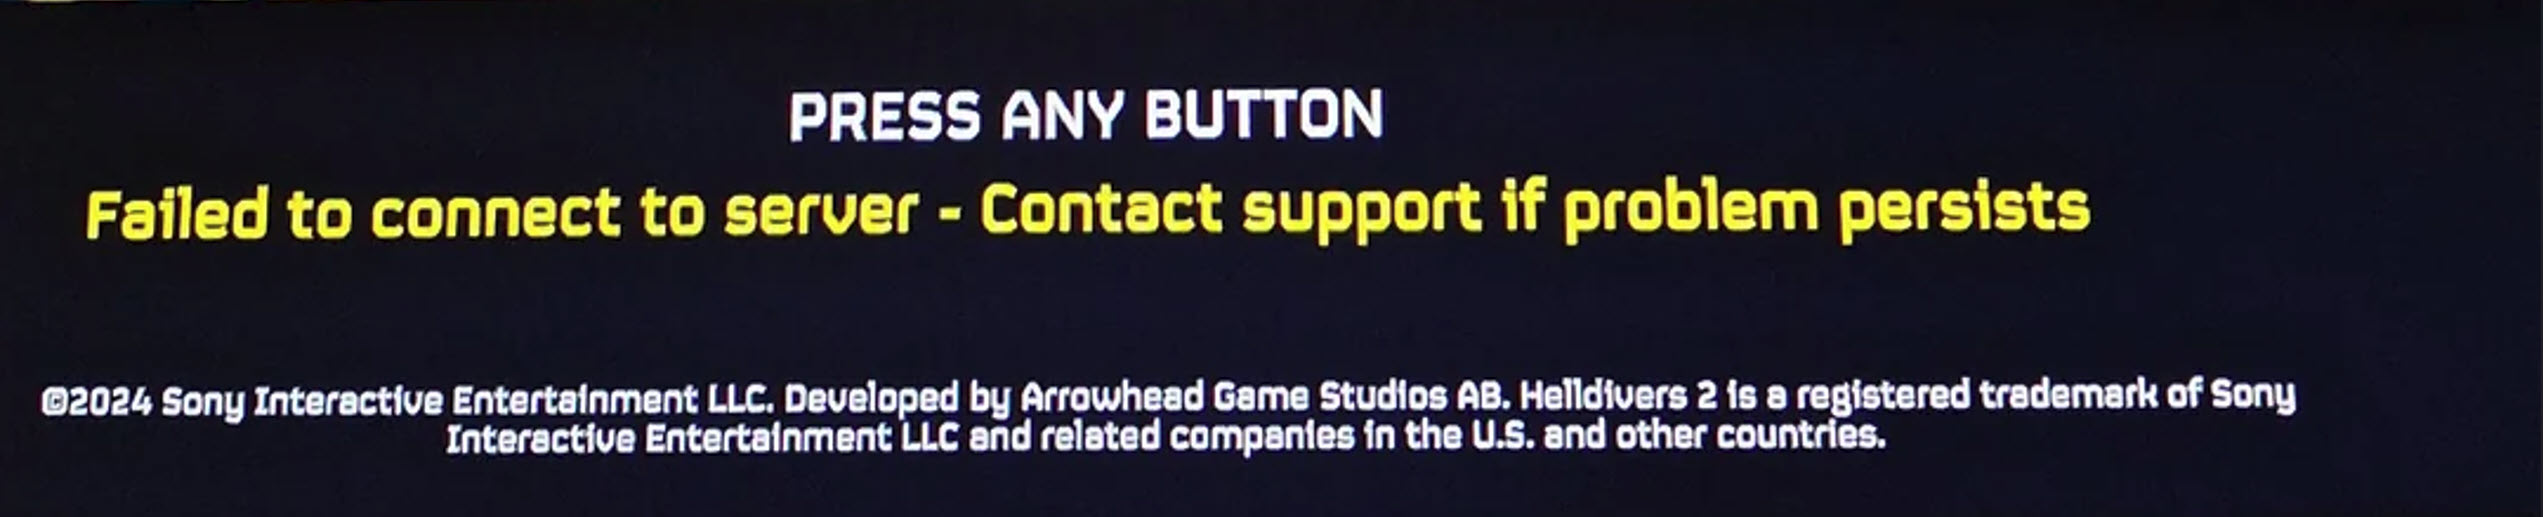 Helldivers 2 Failed to Connect To Servers